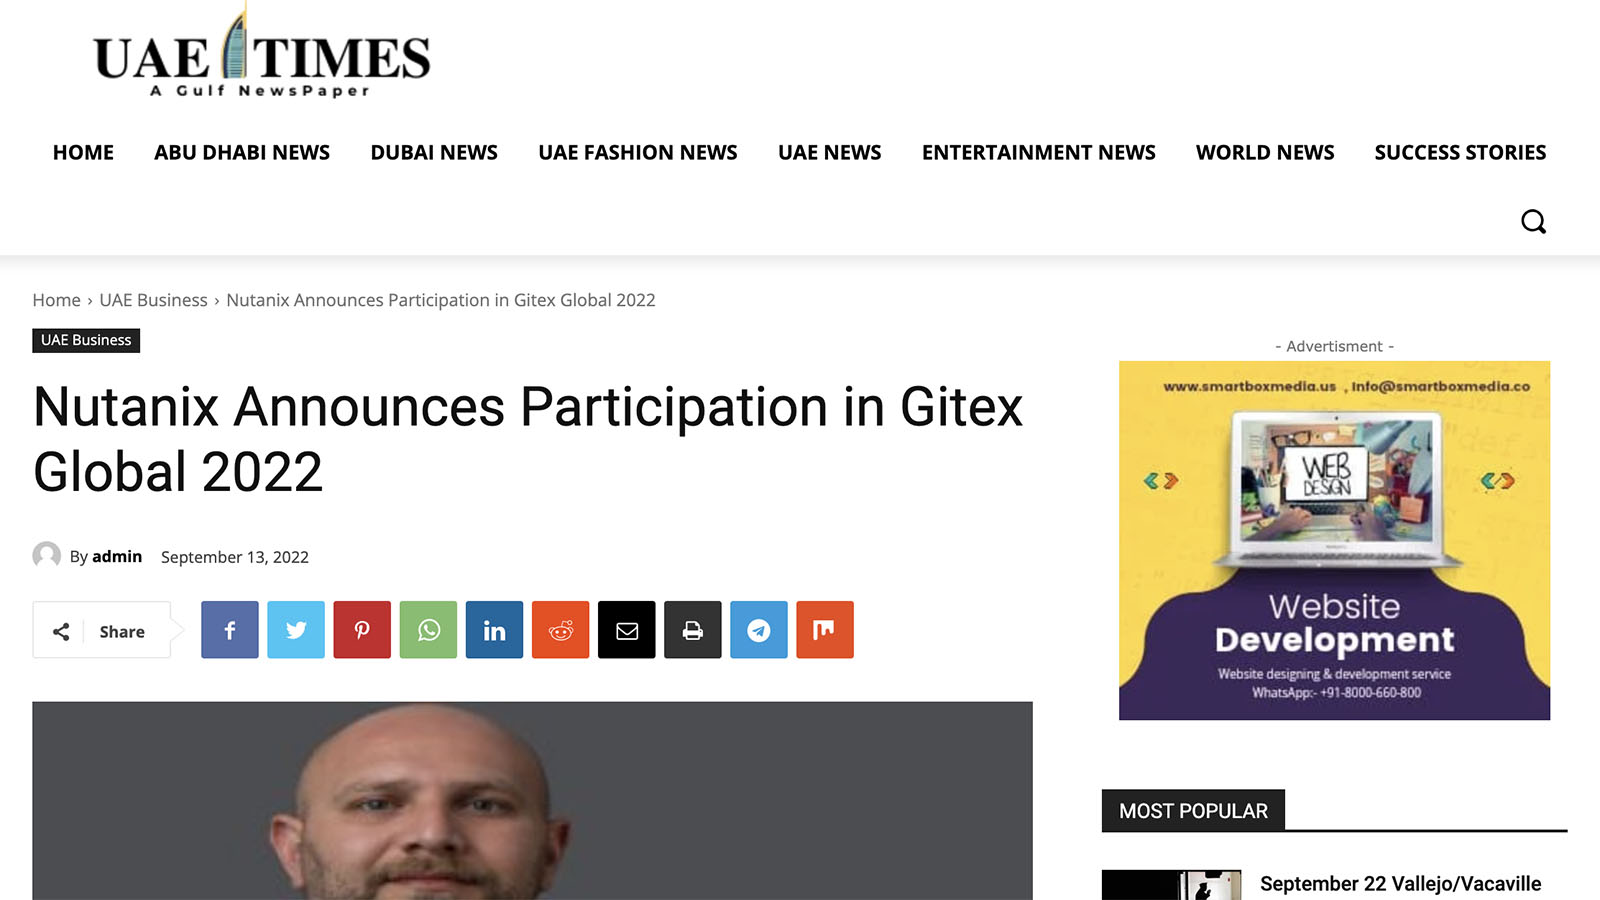 Stratodesk will be participating in Gitex Global 2022 with Nutanix